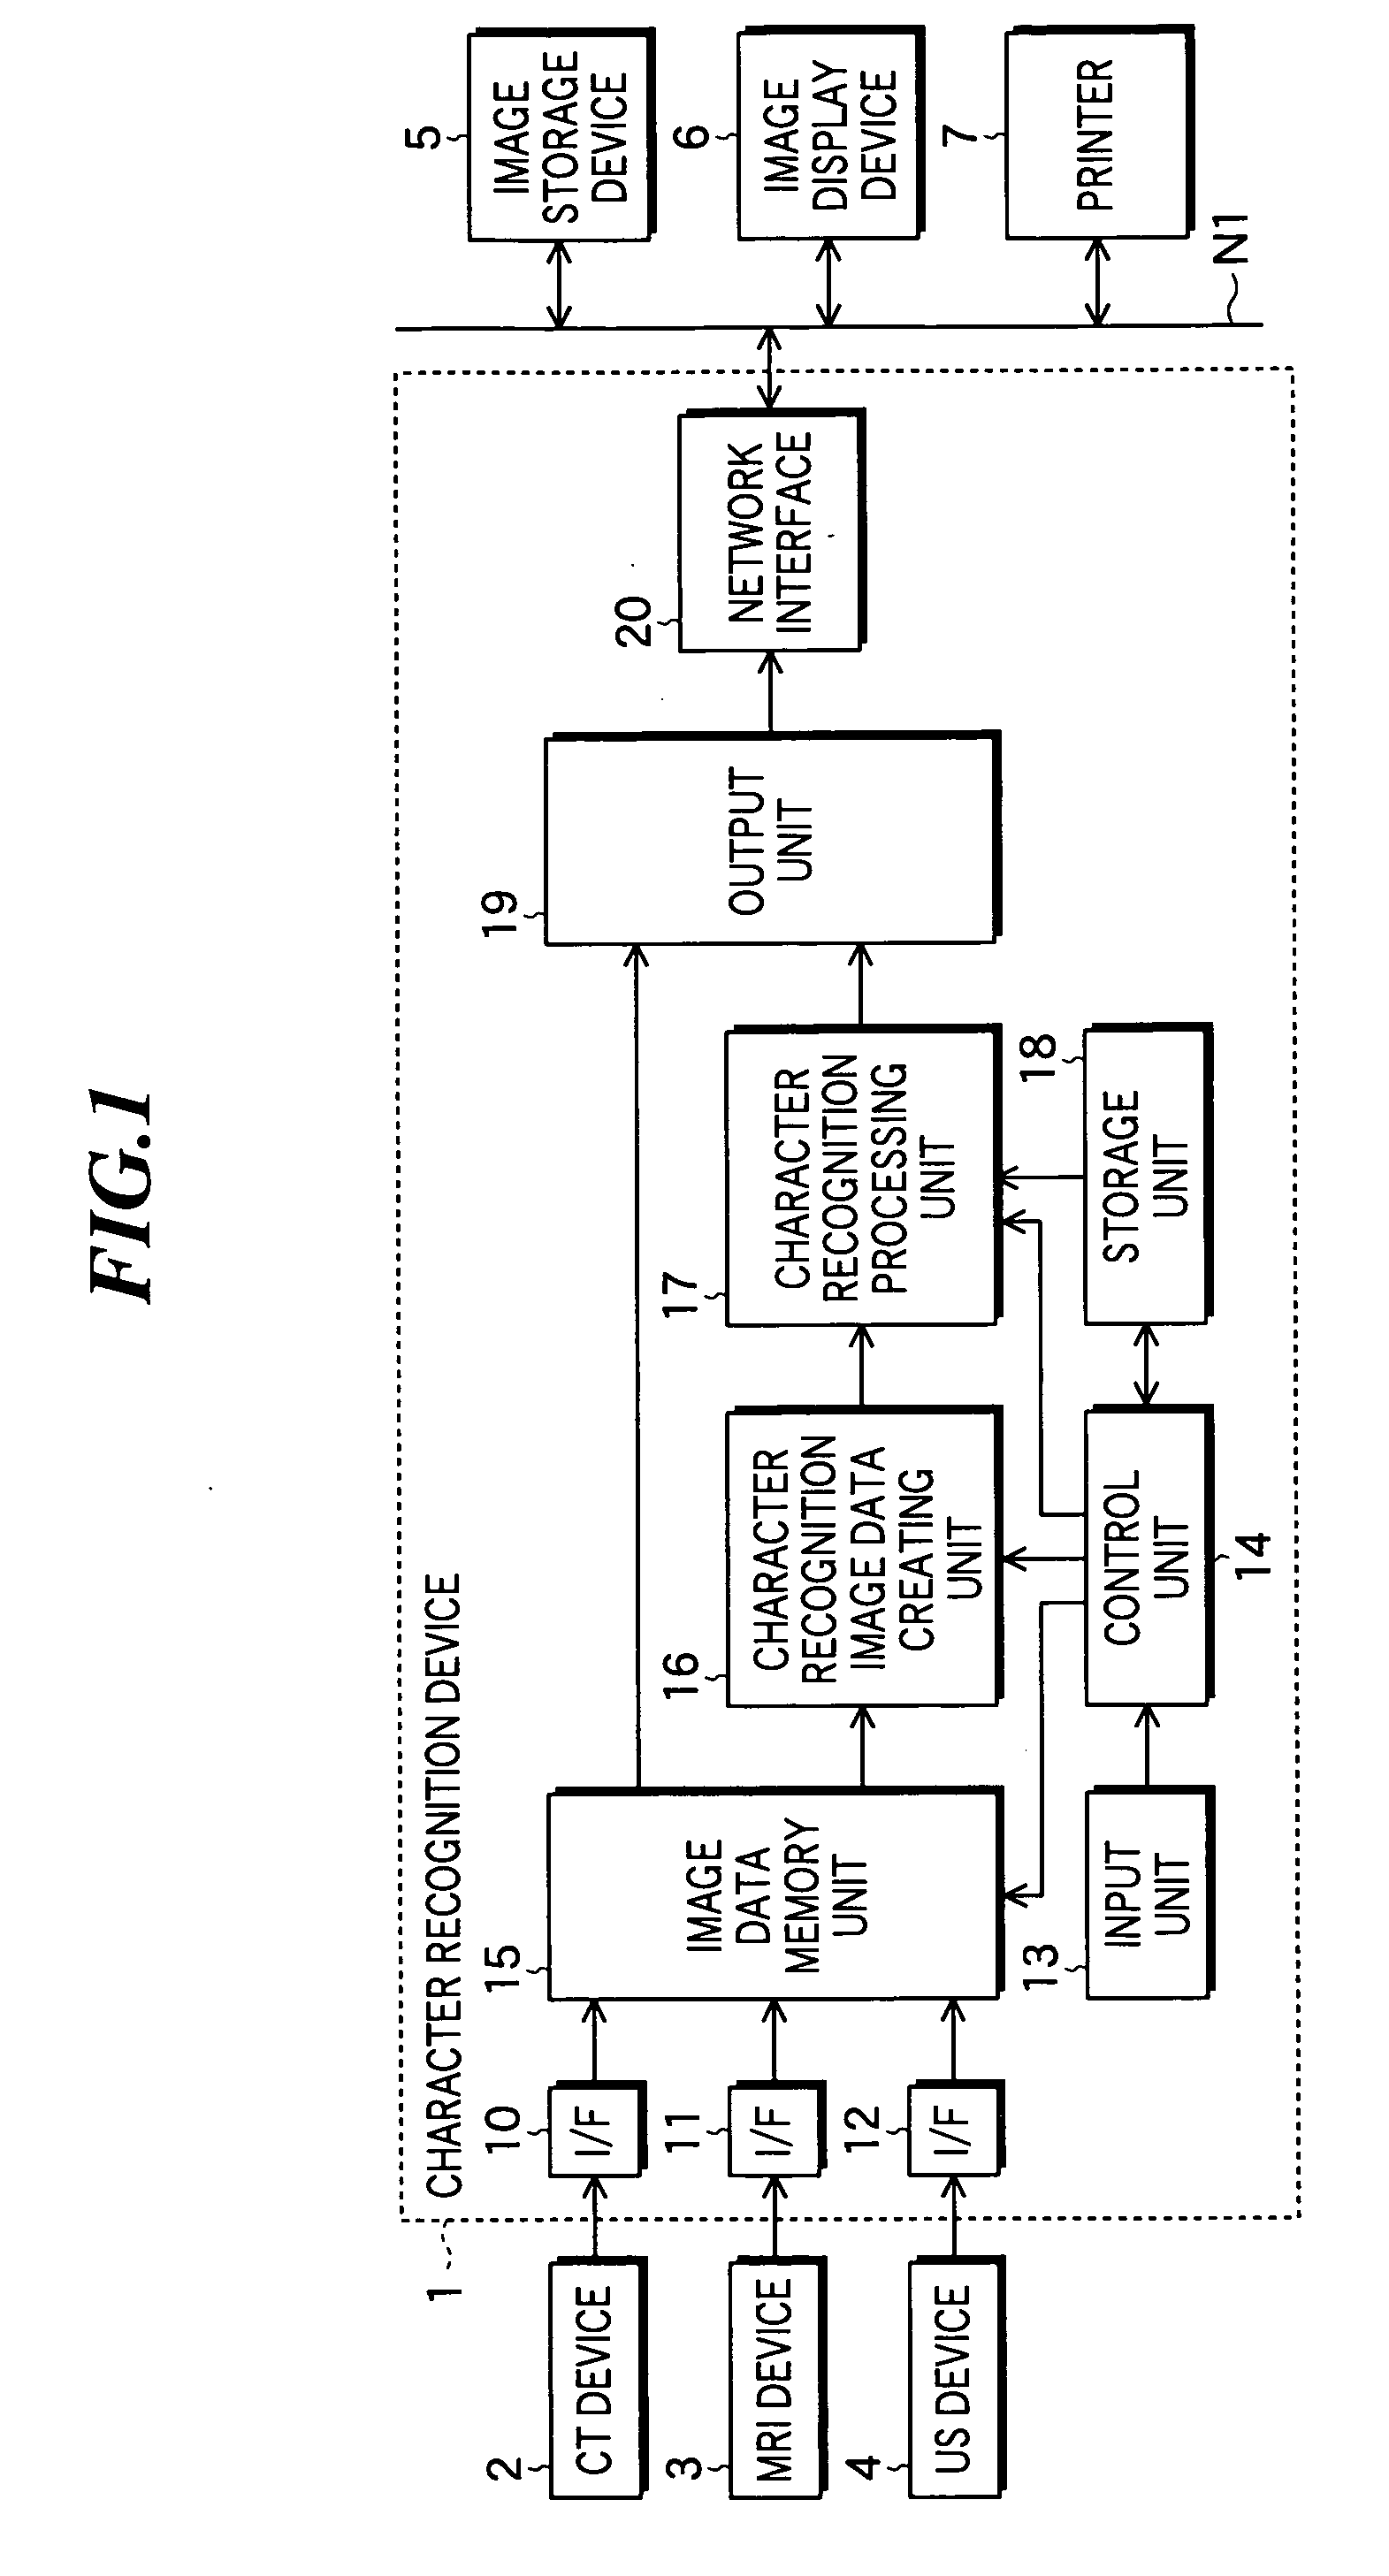 Character recognition device and method